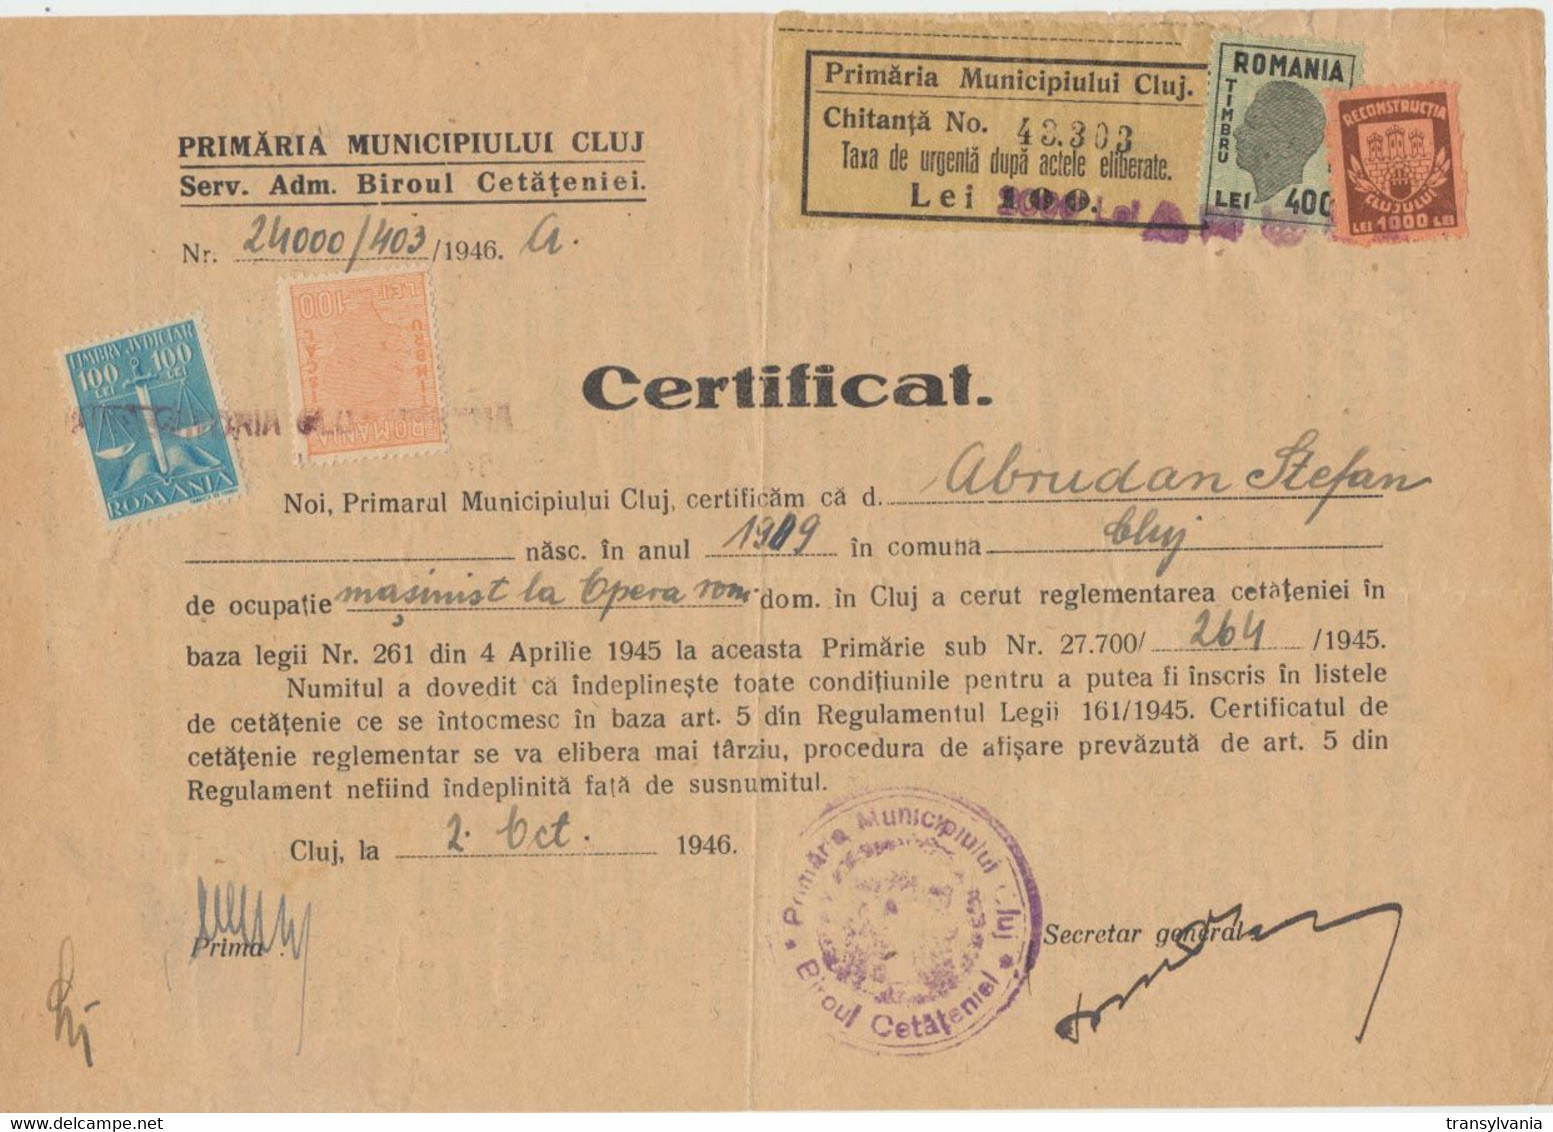 Romania 1946 Certificate Printed On Hungary WW2 Occupation Paper By Cluj Mayoralty - 2 Municipal Revenue Stamps - Fiscale Zegels